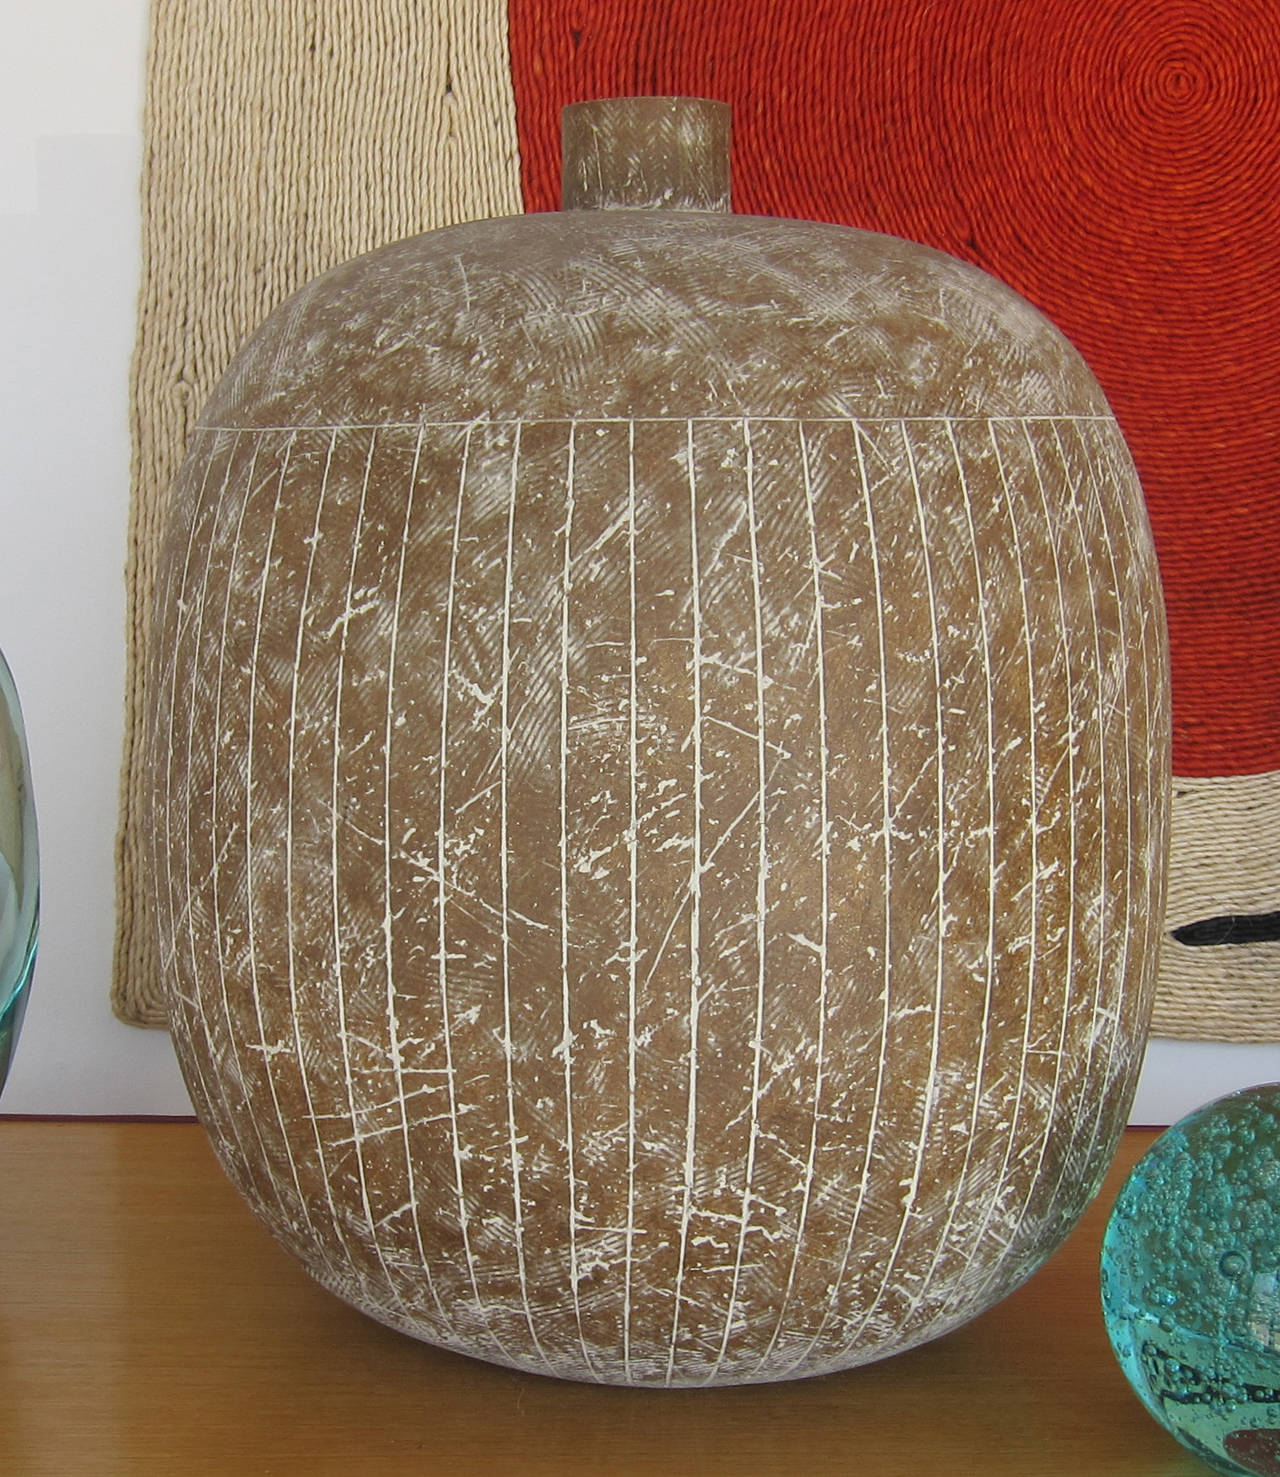 Large ceramic vessel by Caude Conover titled “Aztec.” Complimentary shipping to Continental US only.